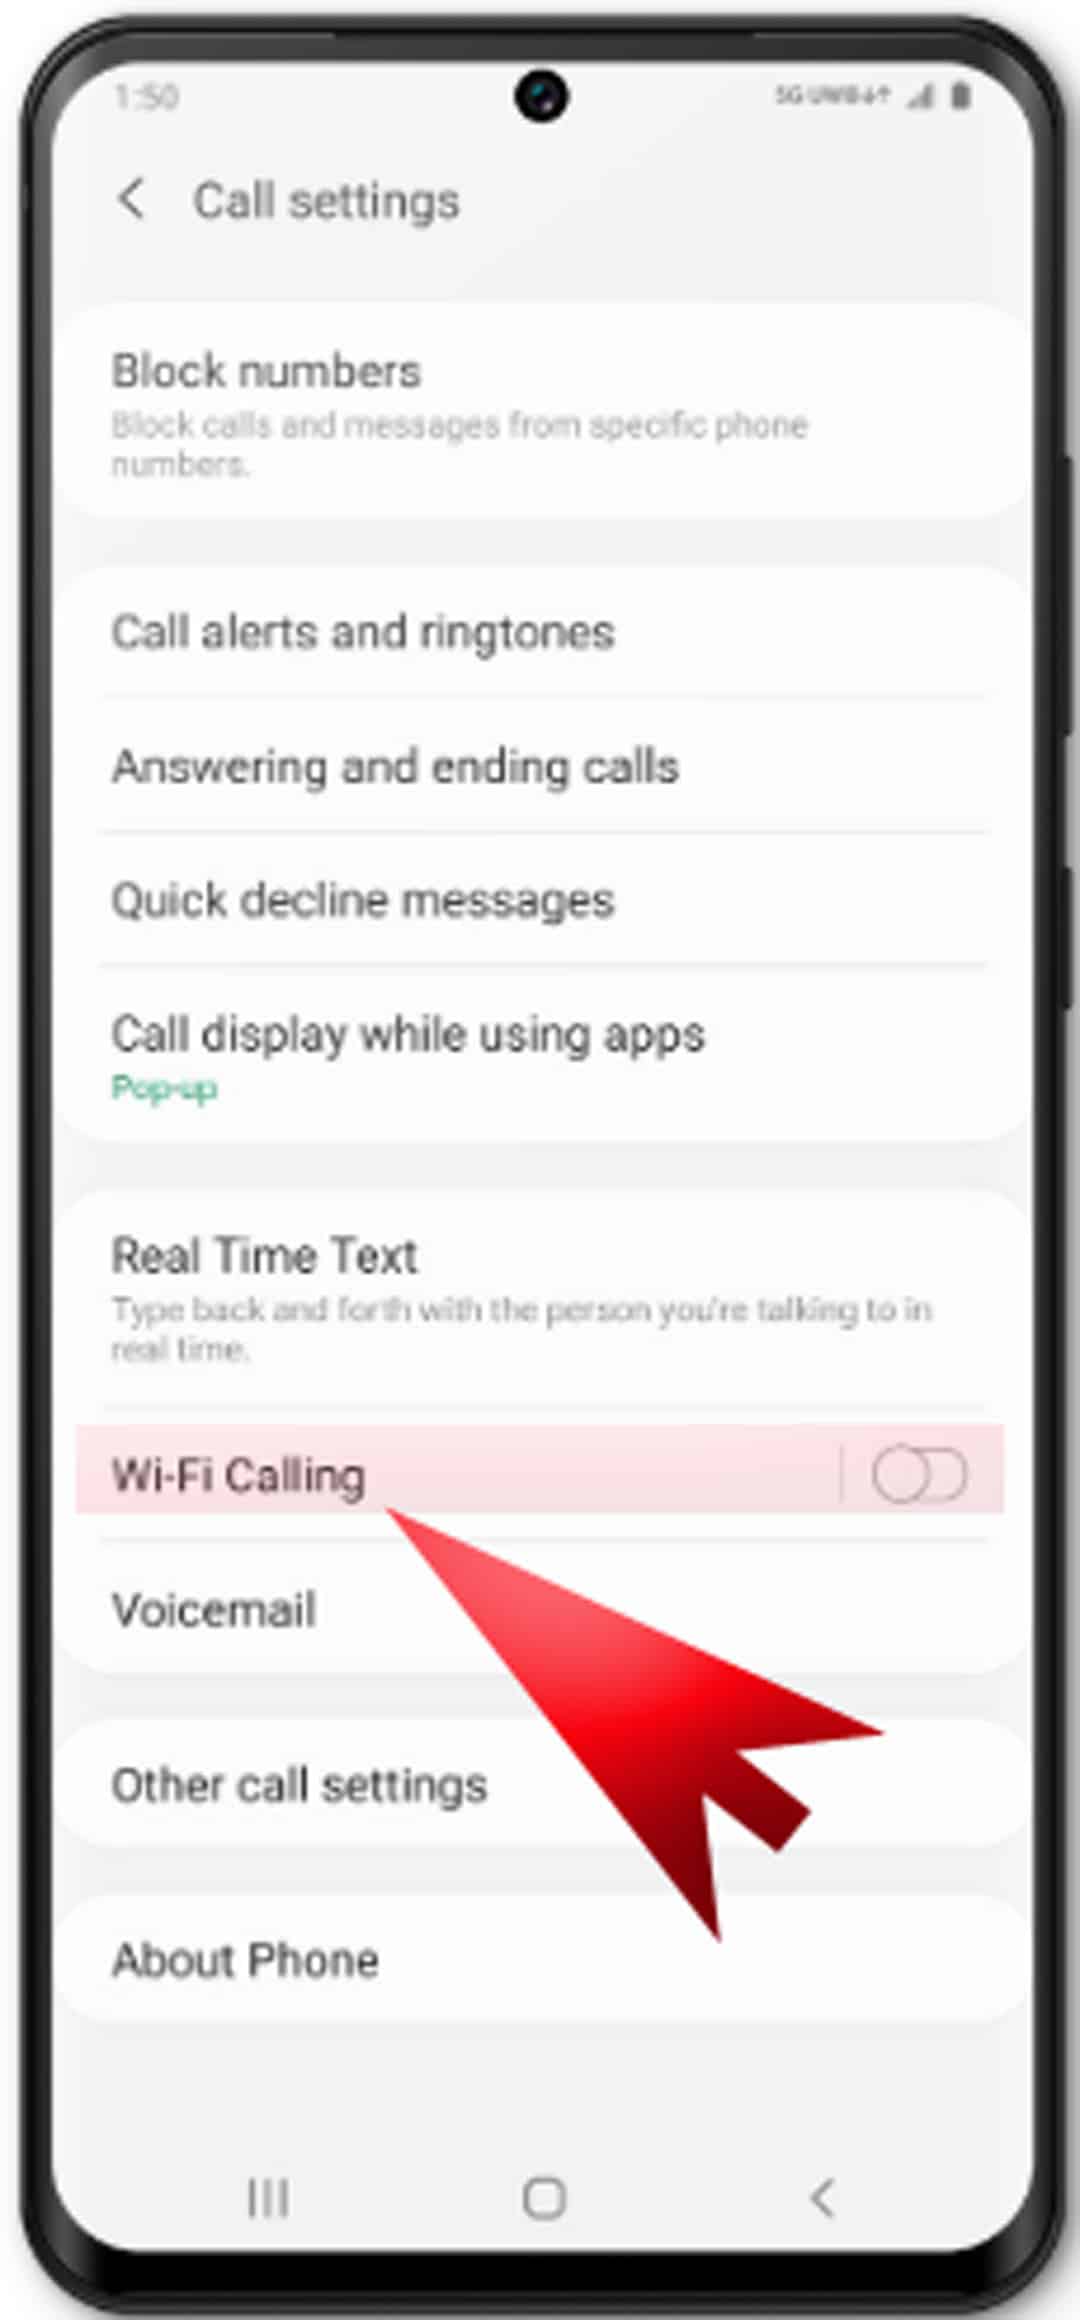 All You Need to Know About Wifi Calling - Travelers Wifi